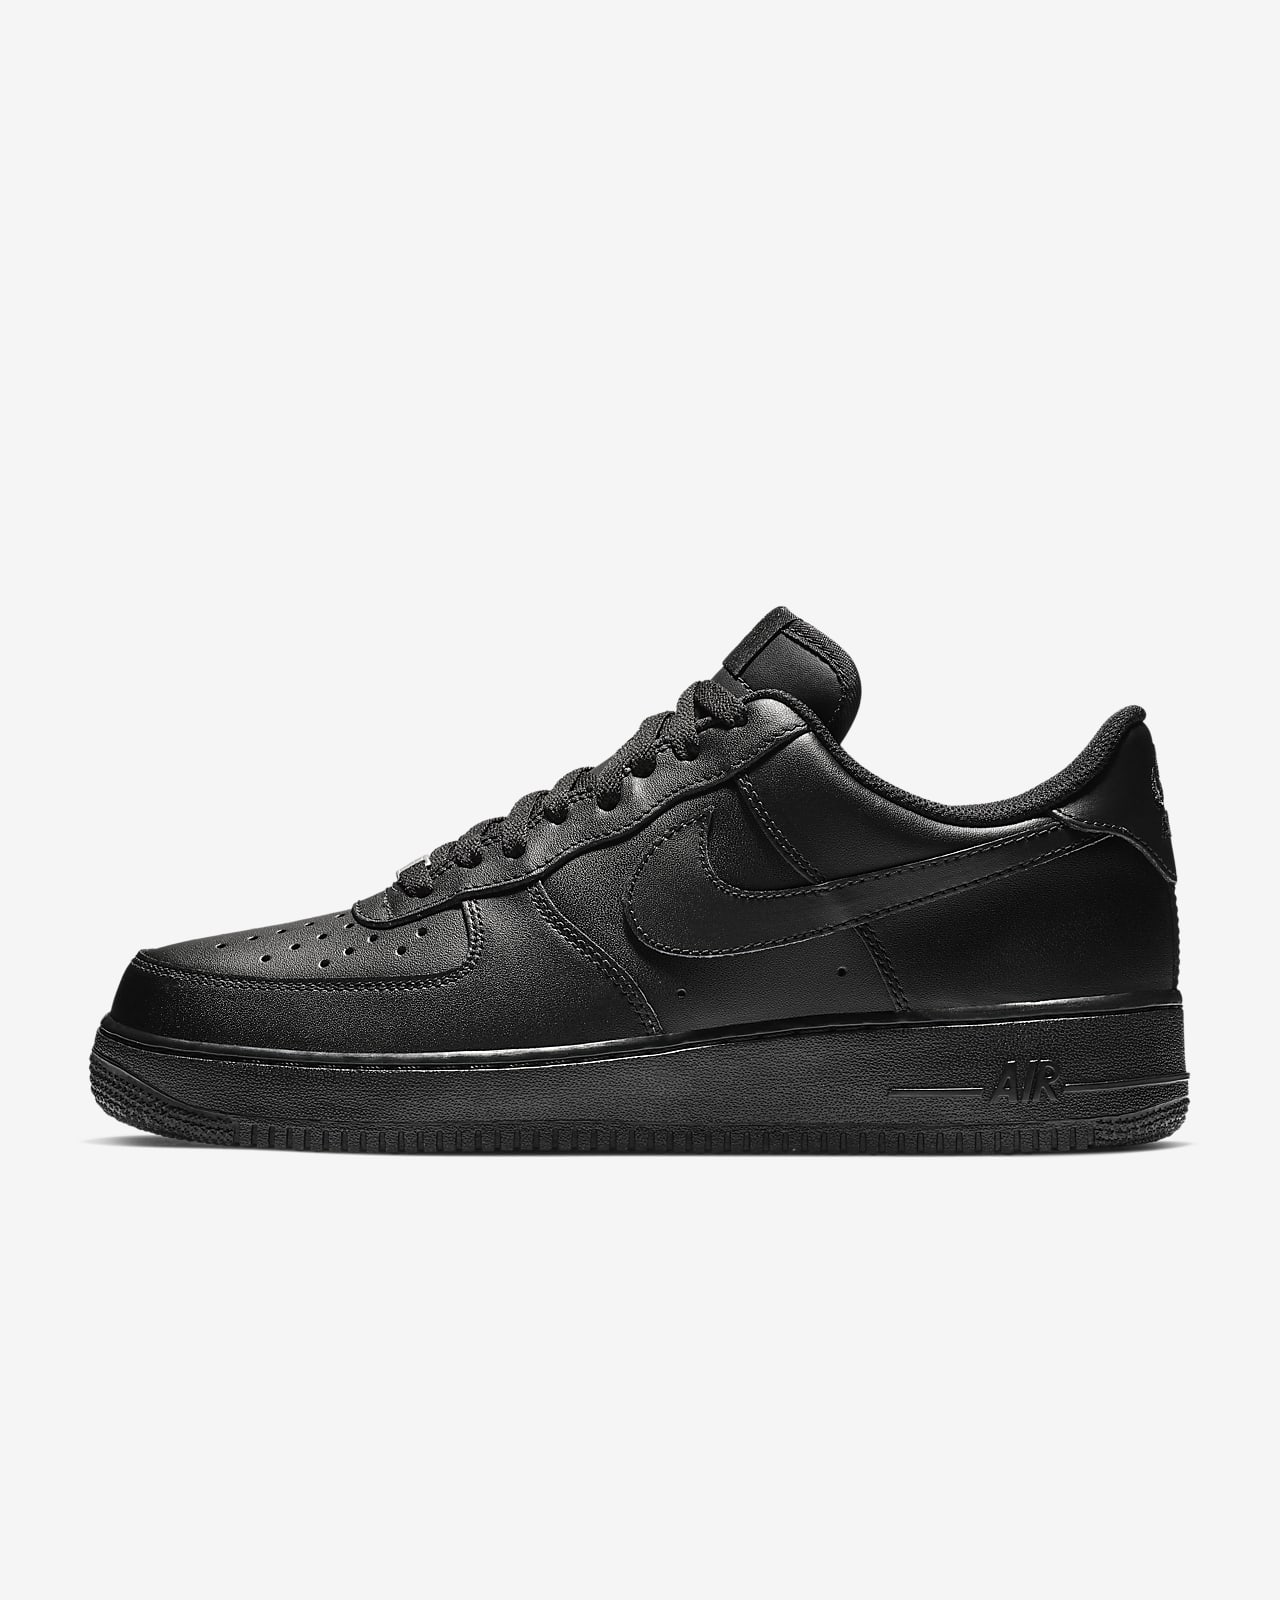 air force 1 size 8.5